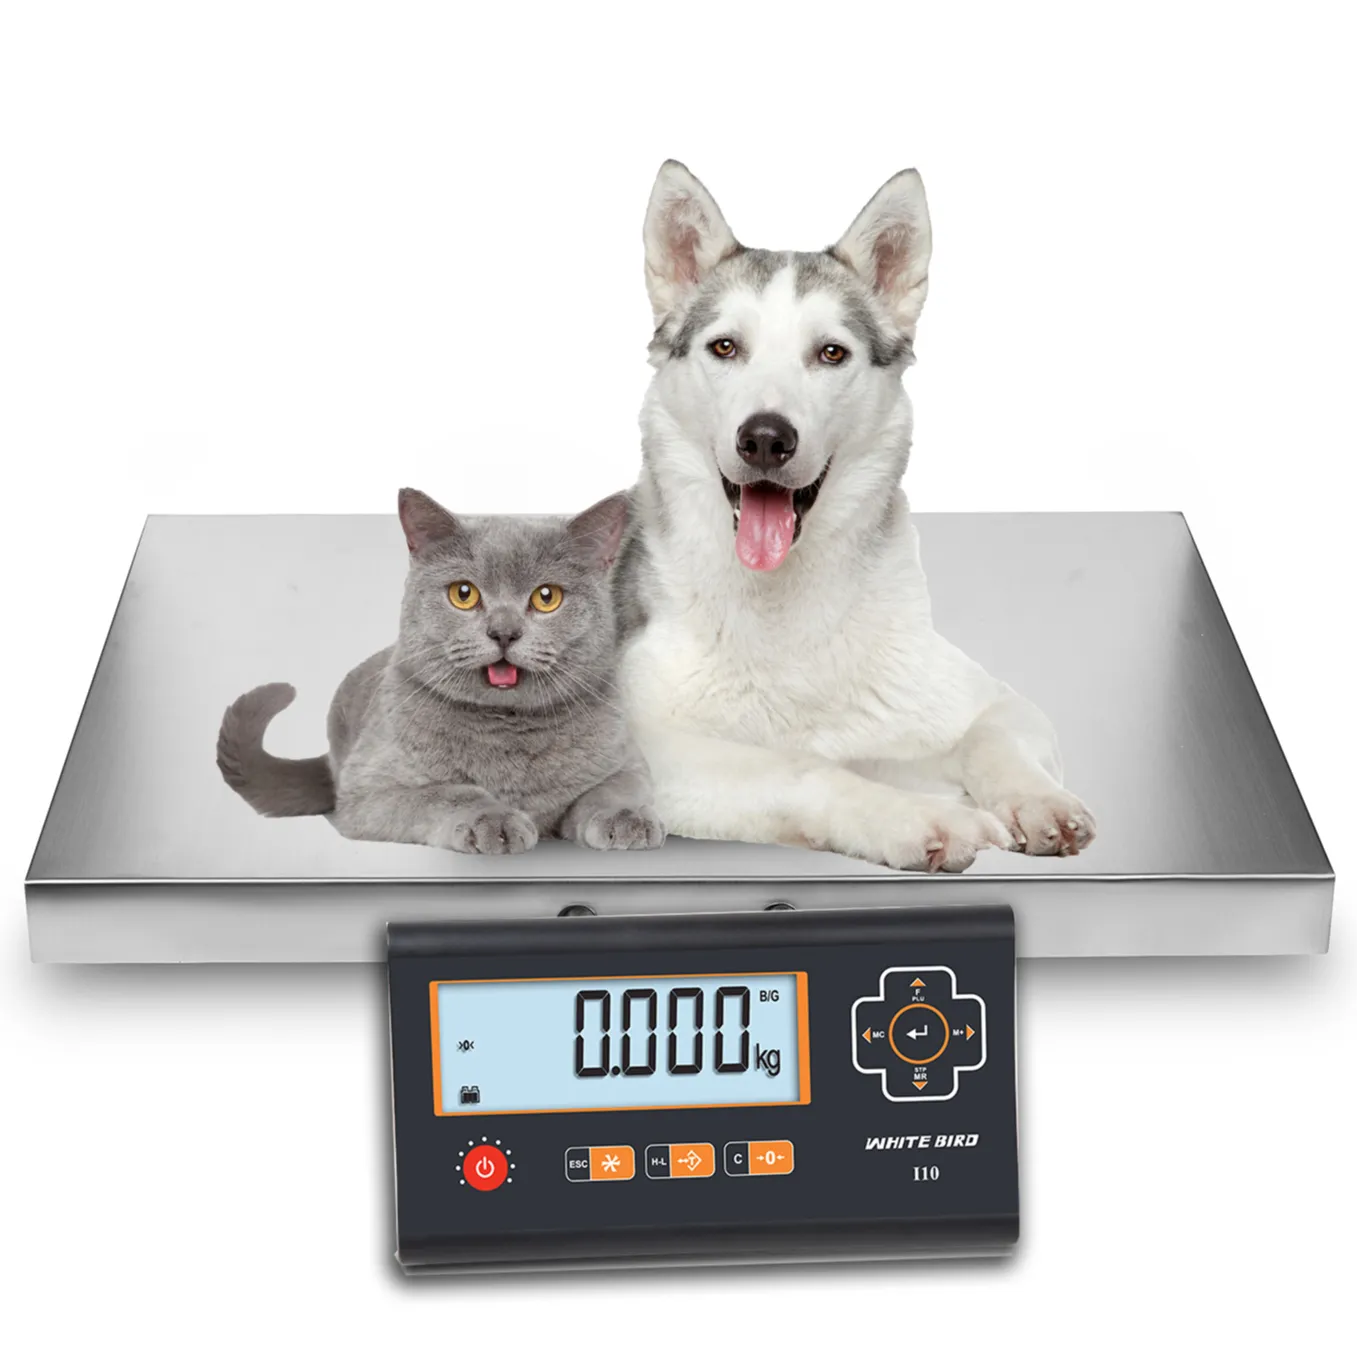 veterinary weighing scale Electronic Veterinary Animal Cat Pet Weighing Scale